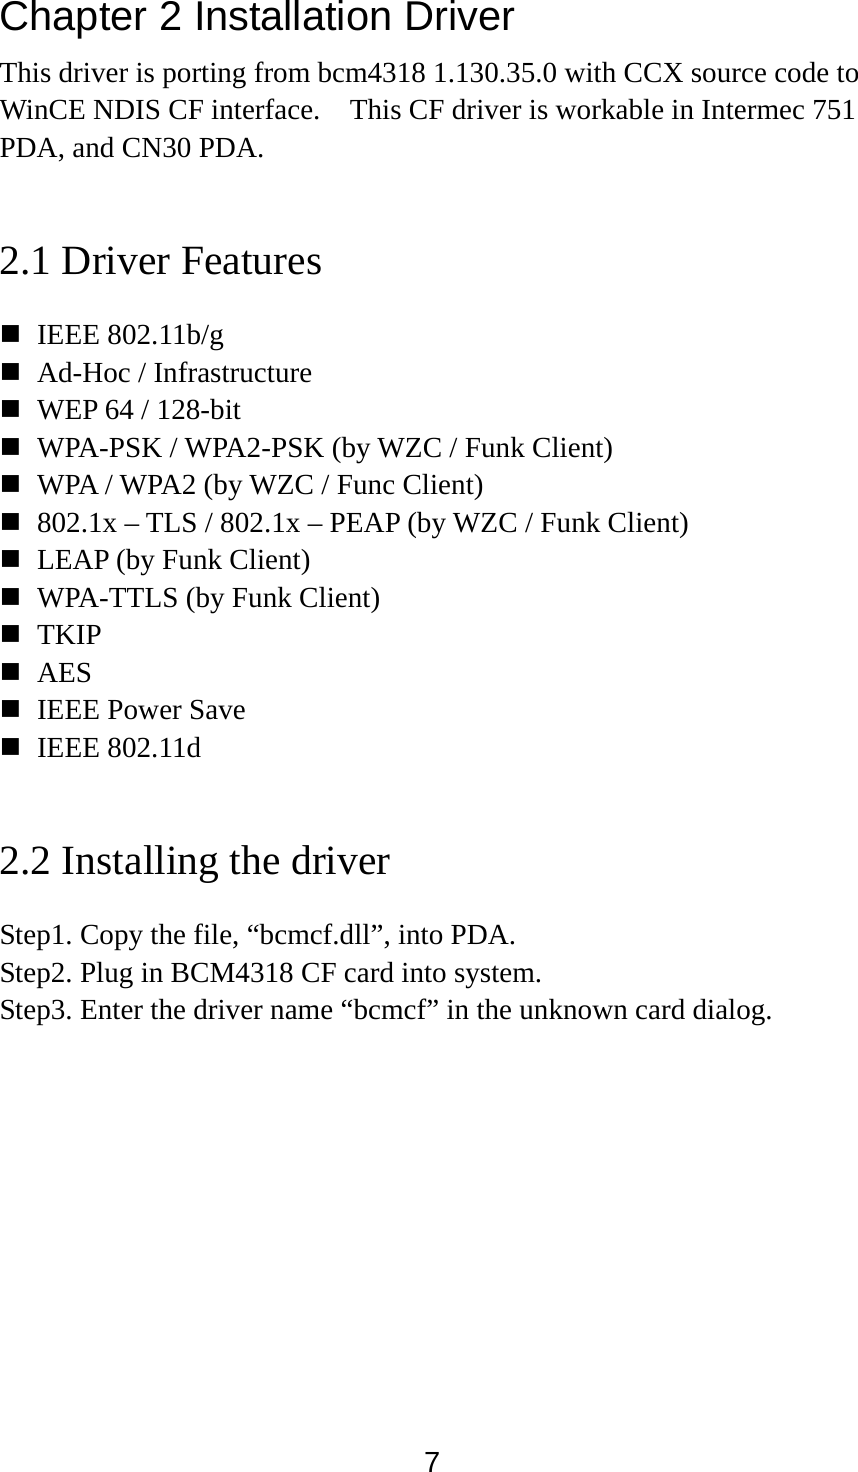 7 Chapter 2 Installation Driver This driver is porting from bcm4318 1.130.35.0 with CCX source code to WinCE NDIS CF interface.    This CF driver is workable in Intermec 751 PDA, and CN30 PDA.    2.1 Driver Features  IEEE 802.11b/g  Ad-Hoc / Infrastructure  WEP 64 / 128-bit  WPA-PSK / WPA2-PSK (by WZC / Funk Client)  WPA / WPA2 (by WZC / Func Client)  802.1x – TLS / 802.1x – PEAP (by WZC / Funk Client)  LEAP (by Funk Client)  WPA-TTLS (by Funk Client)  TKIP  AES  IEEE Power Save  IEEE 802.11d  2.2 Installing the driver Step1. Copy the file, “bcmcf.dll”, into PDA. Step2. Plug in BCM4318 CF card into system. Step3. Enter the driver name “bcmcf” in the unknown card dialog.    